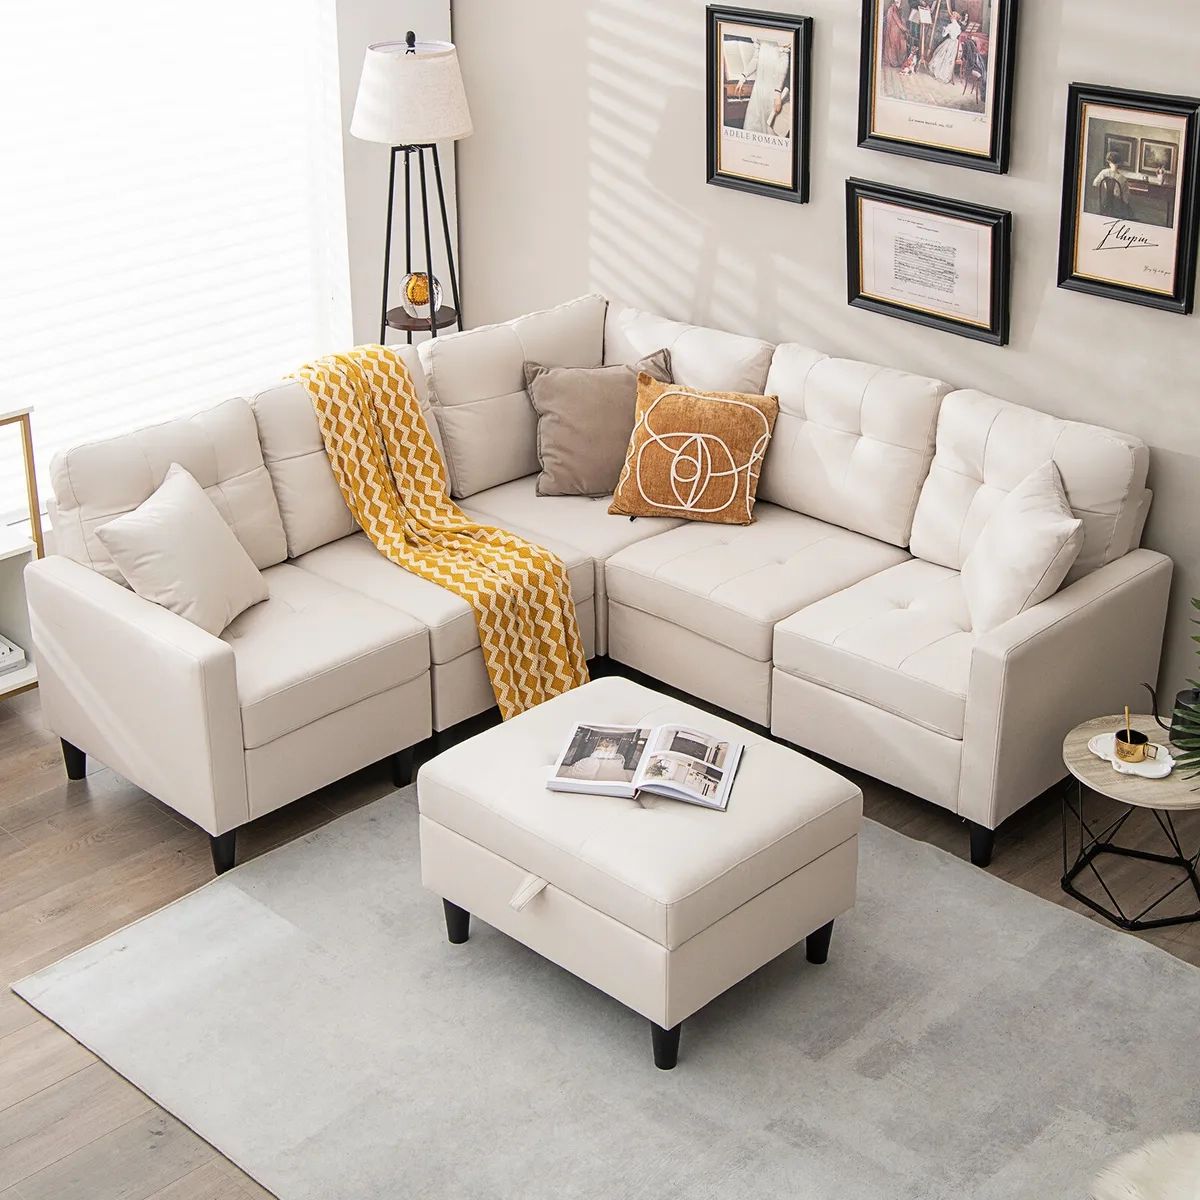 L Shaped Sectional Corner Sofa Set W/ Removable Ottoman & Seat Cushions  Beige | Ebay Throughout Beige L Shaped Sectional Sofas (Photo 5 of 15)